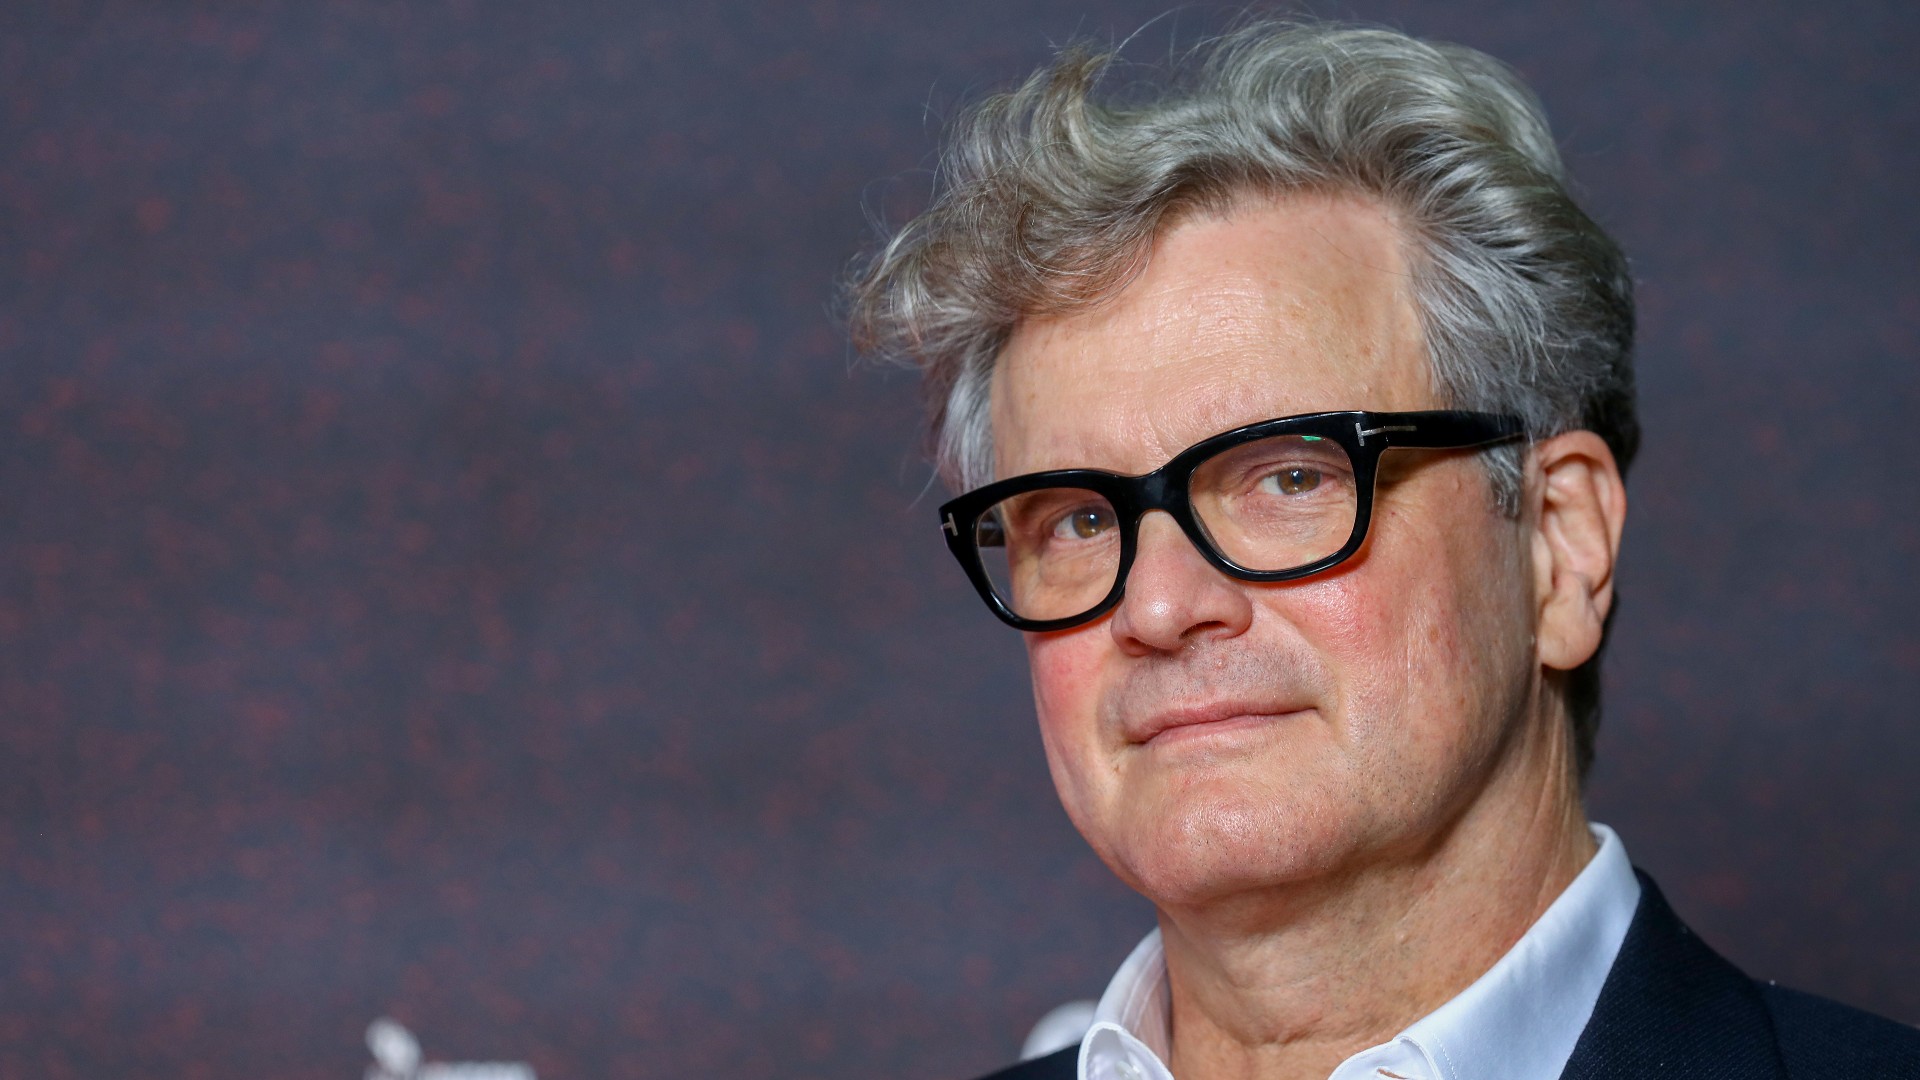 British Icon of the Week: Colin Firth, the Great Actor with Impeccable Manners